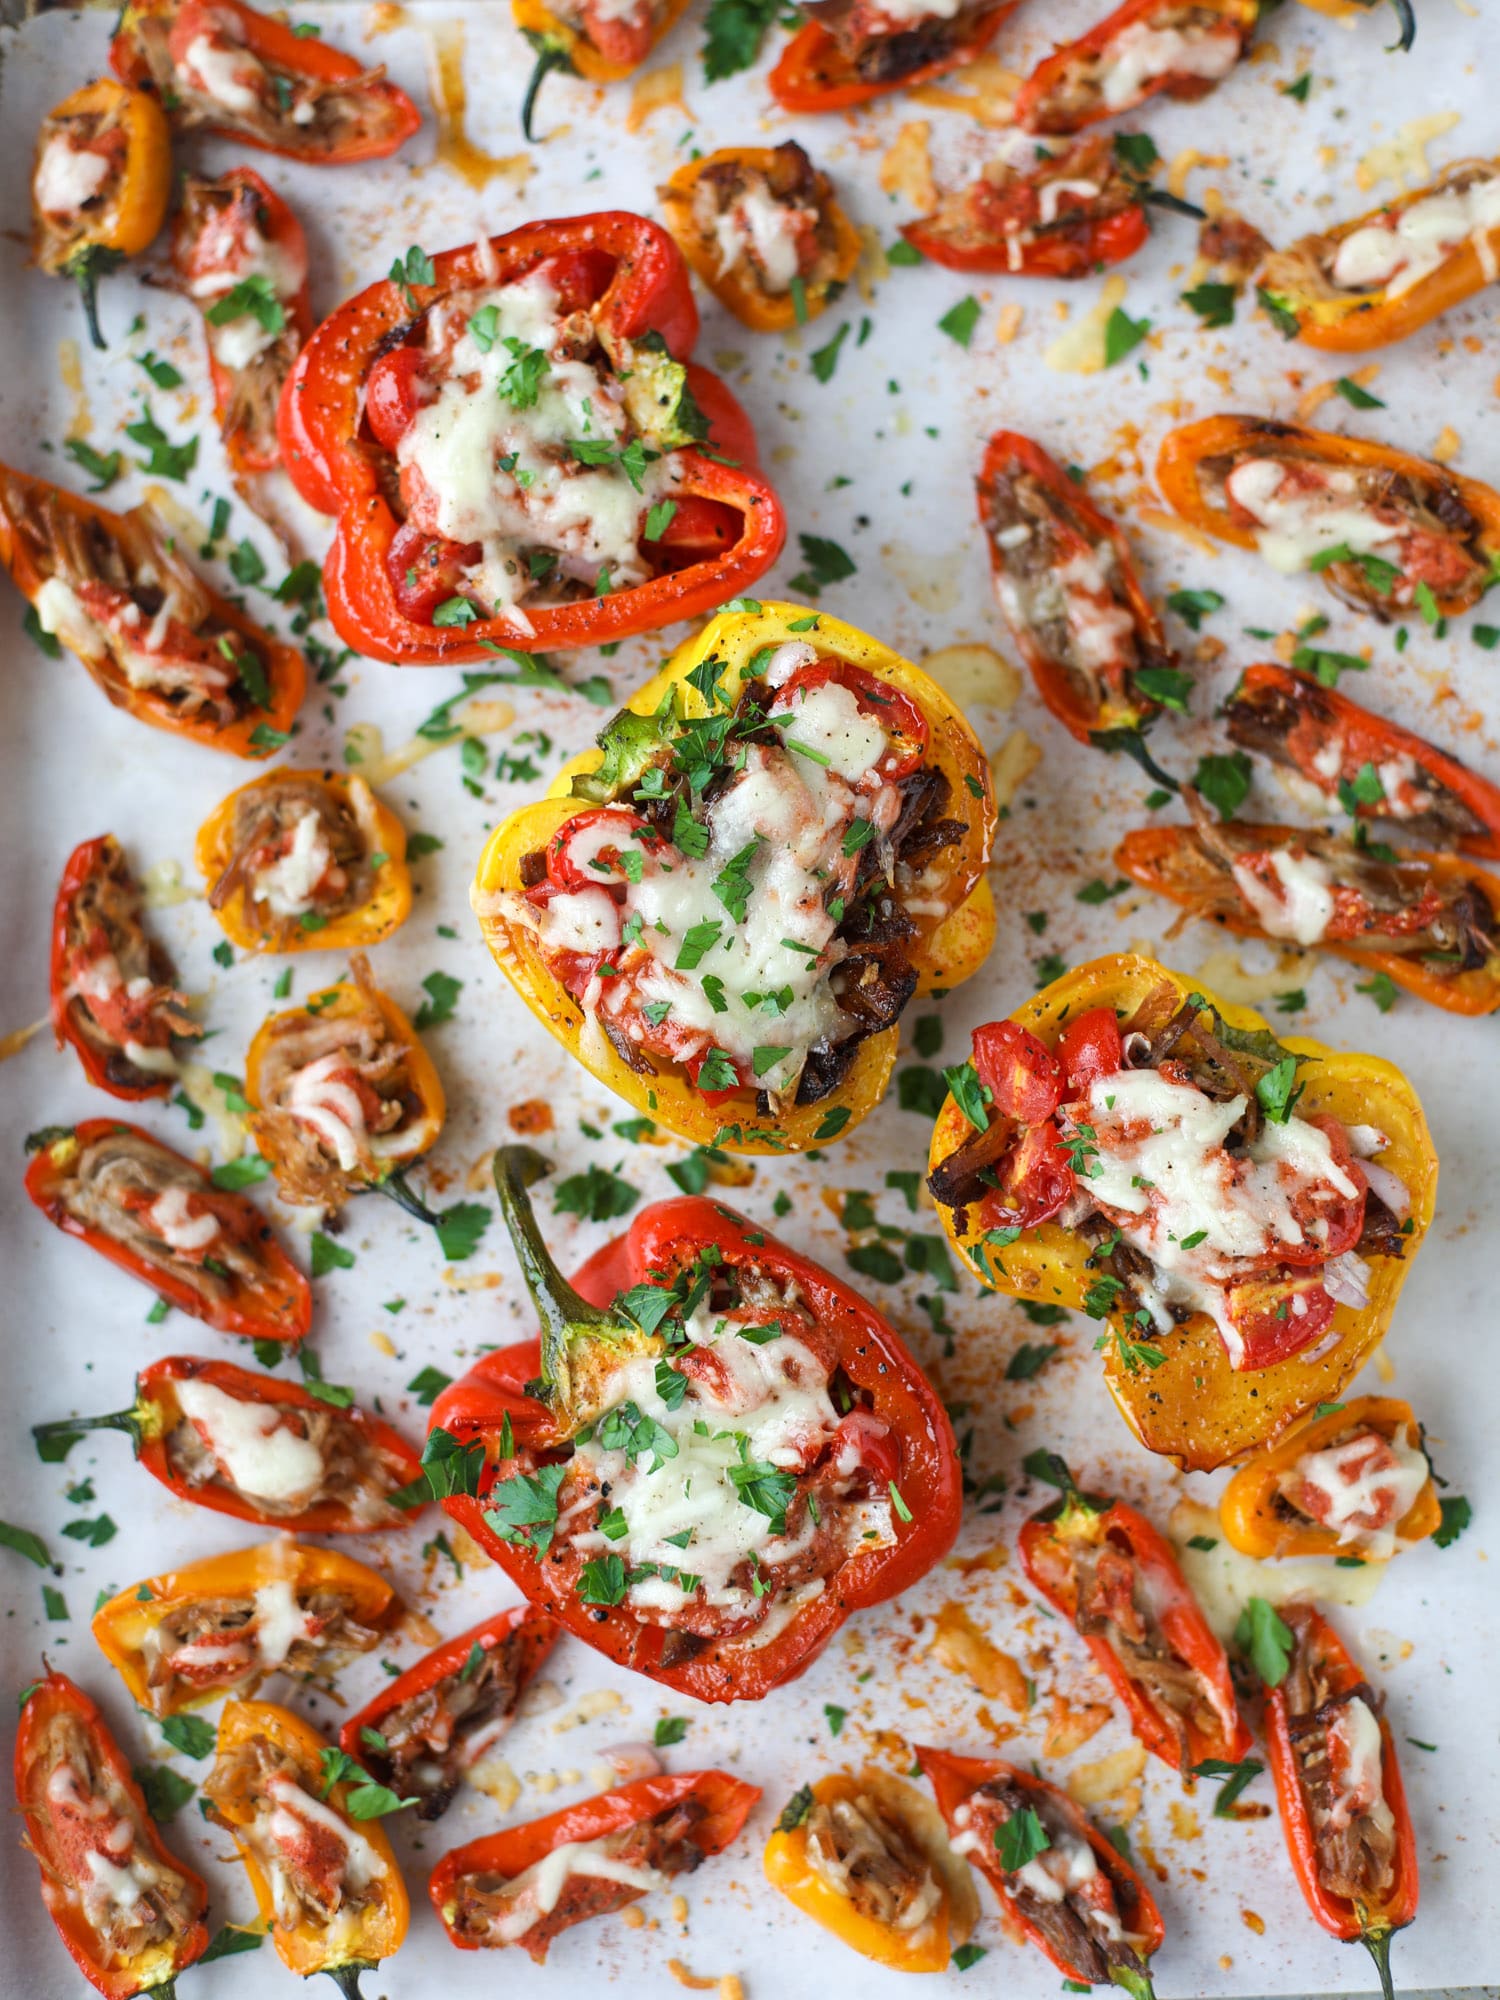 These pulled pork stuffed peppers are a delicious dinner idea for any weeknight! They work great with leftover pulled pork and the filling is totally customizable. They are flavorful, come together quickly and always a crowd pleaser! I howsweeteats.com #pulledpork #stuffedpeppers